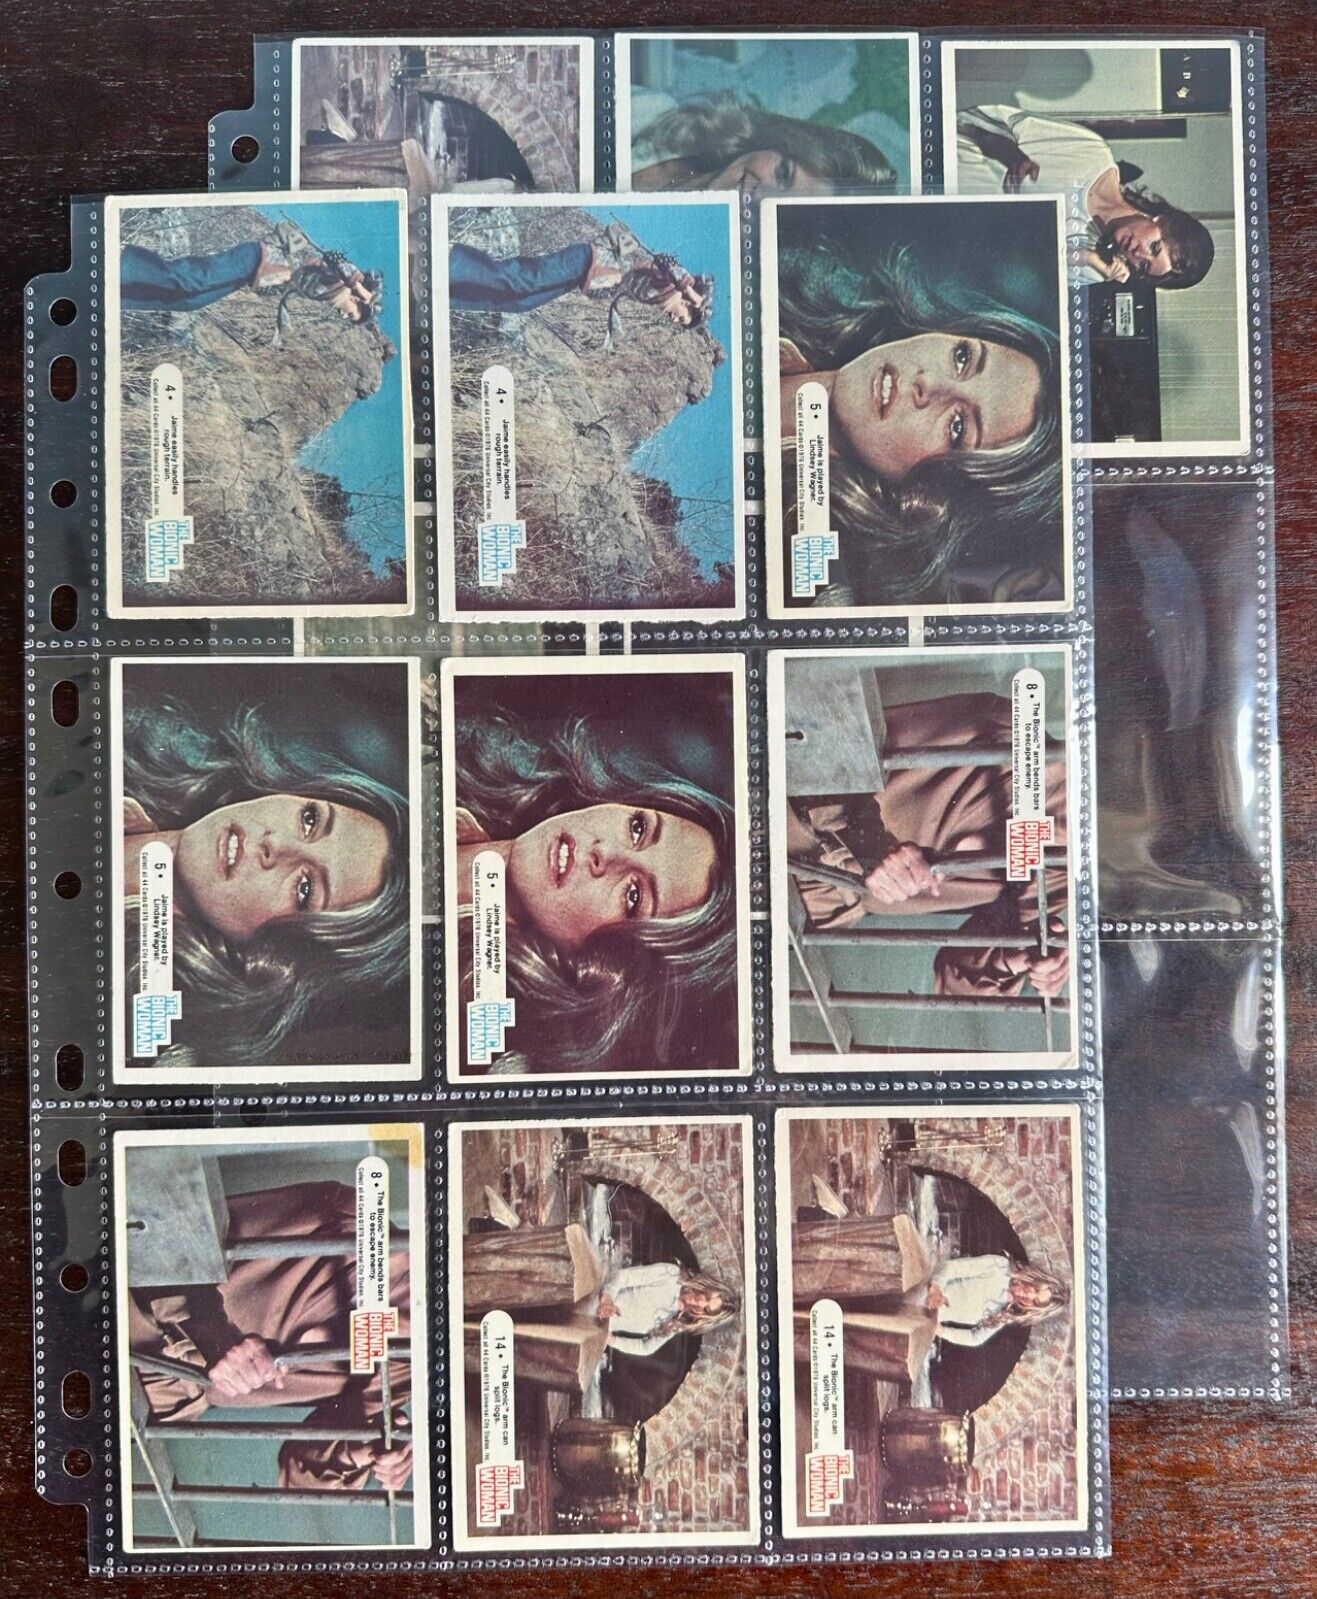 Lot of 14 Vintage Bionic Woman Trading Cards, Donruss (1976), With Duplicates